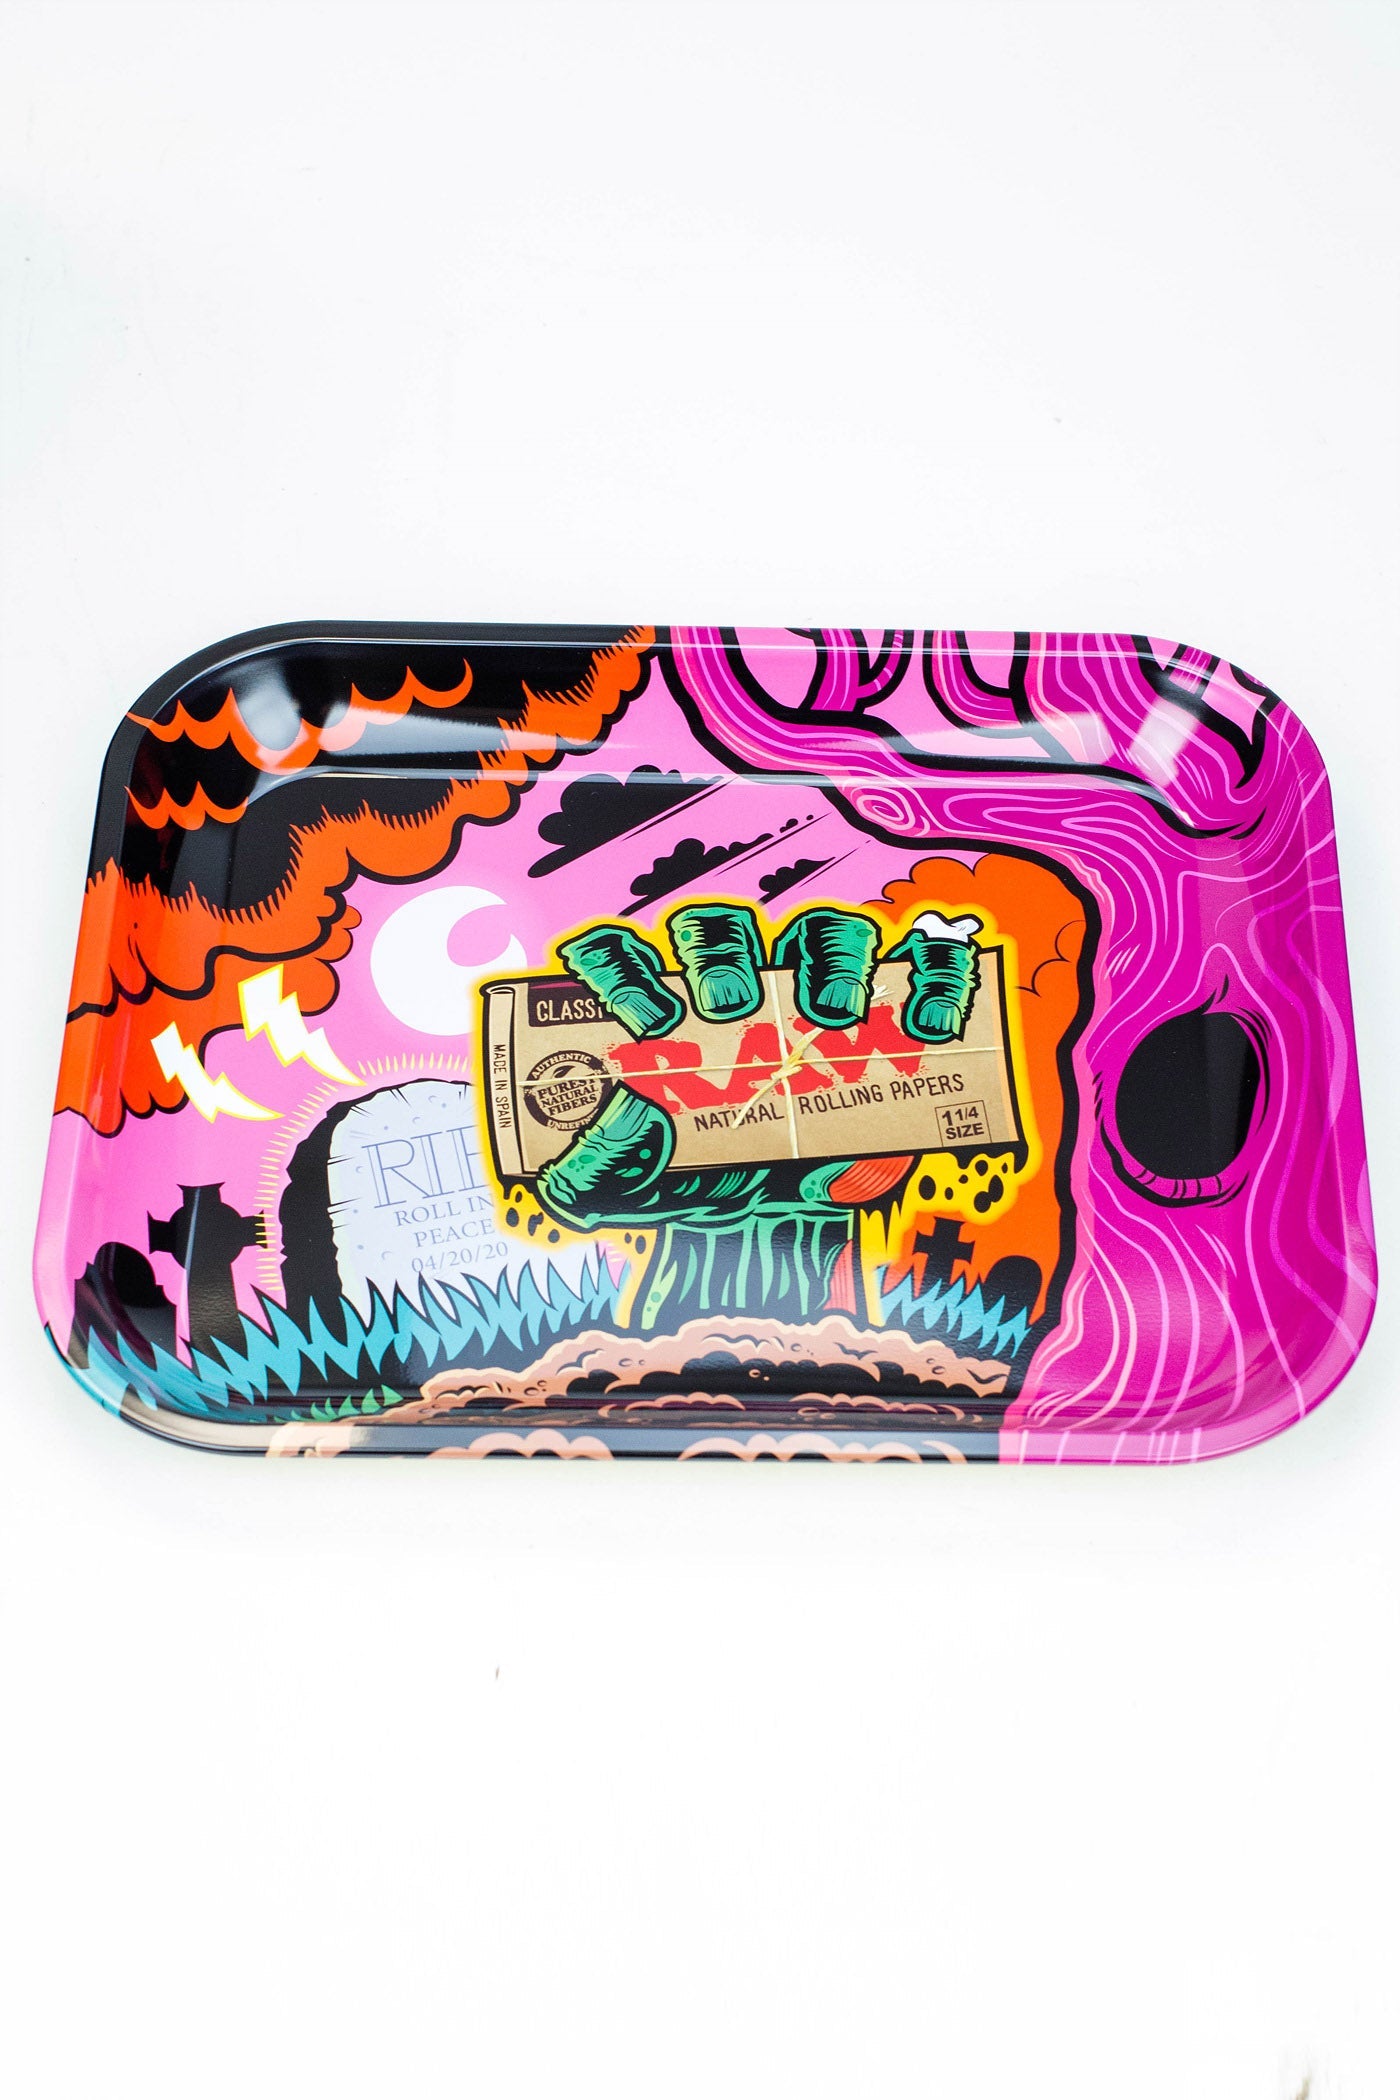 Raw Large size Rolling tray_10